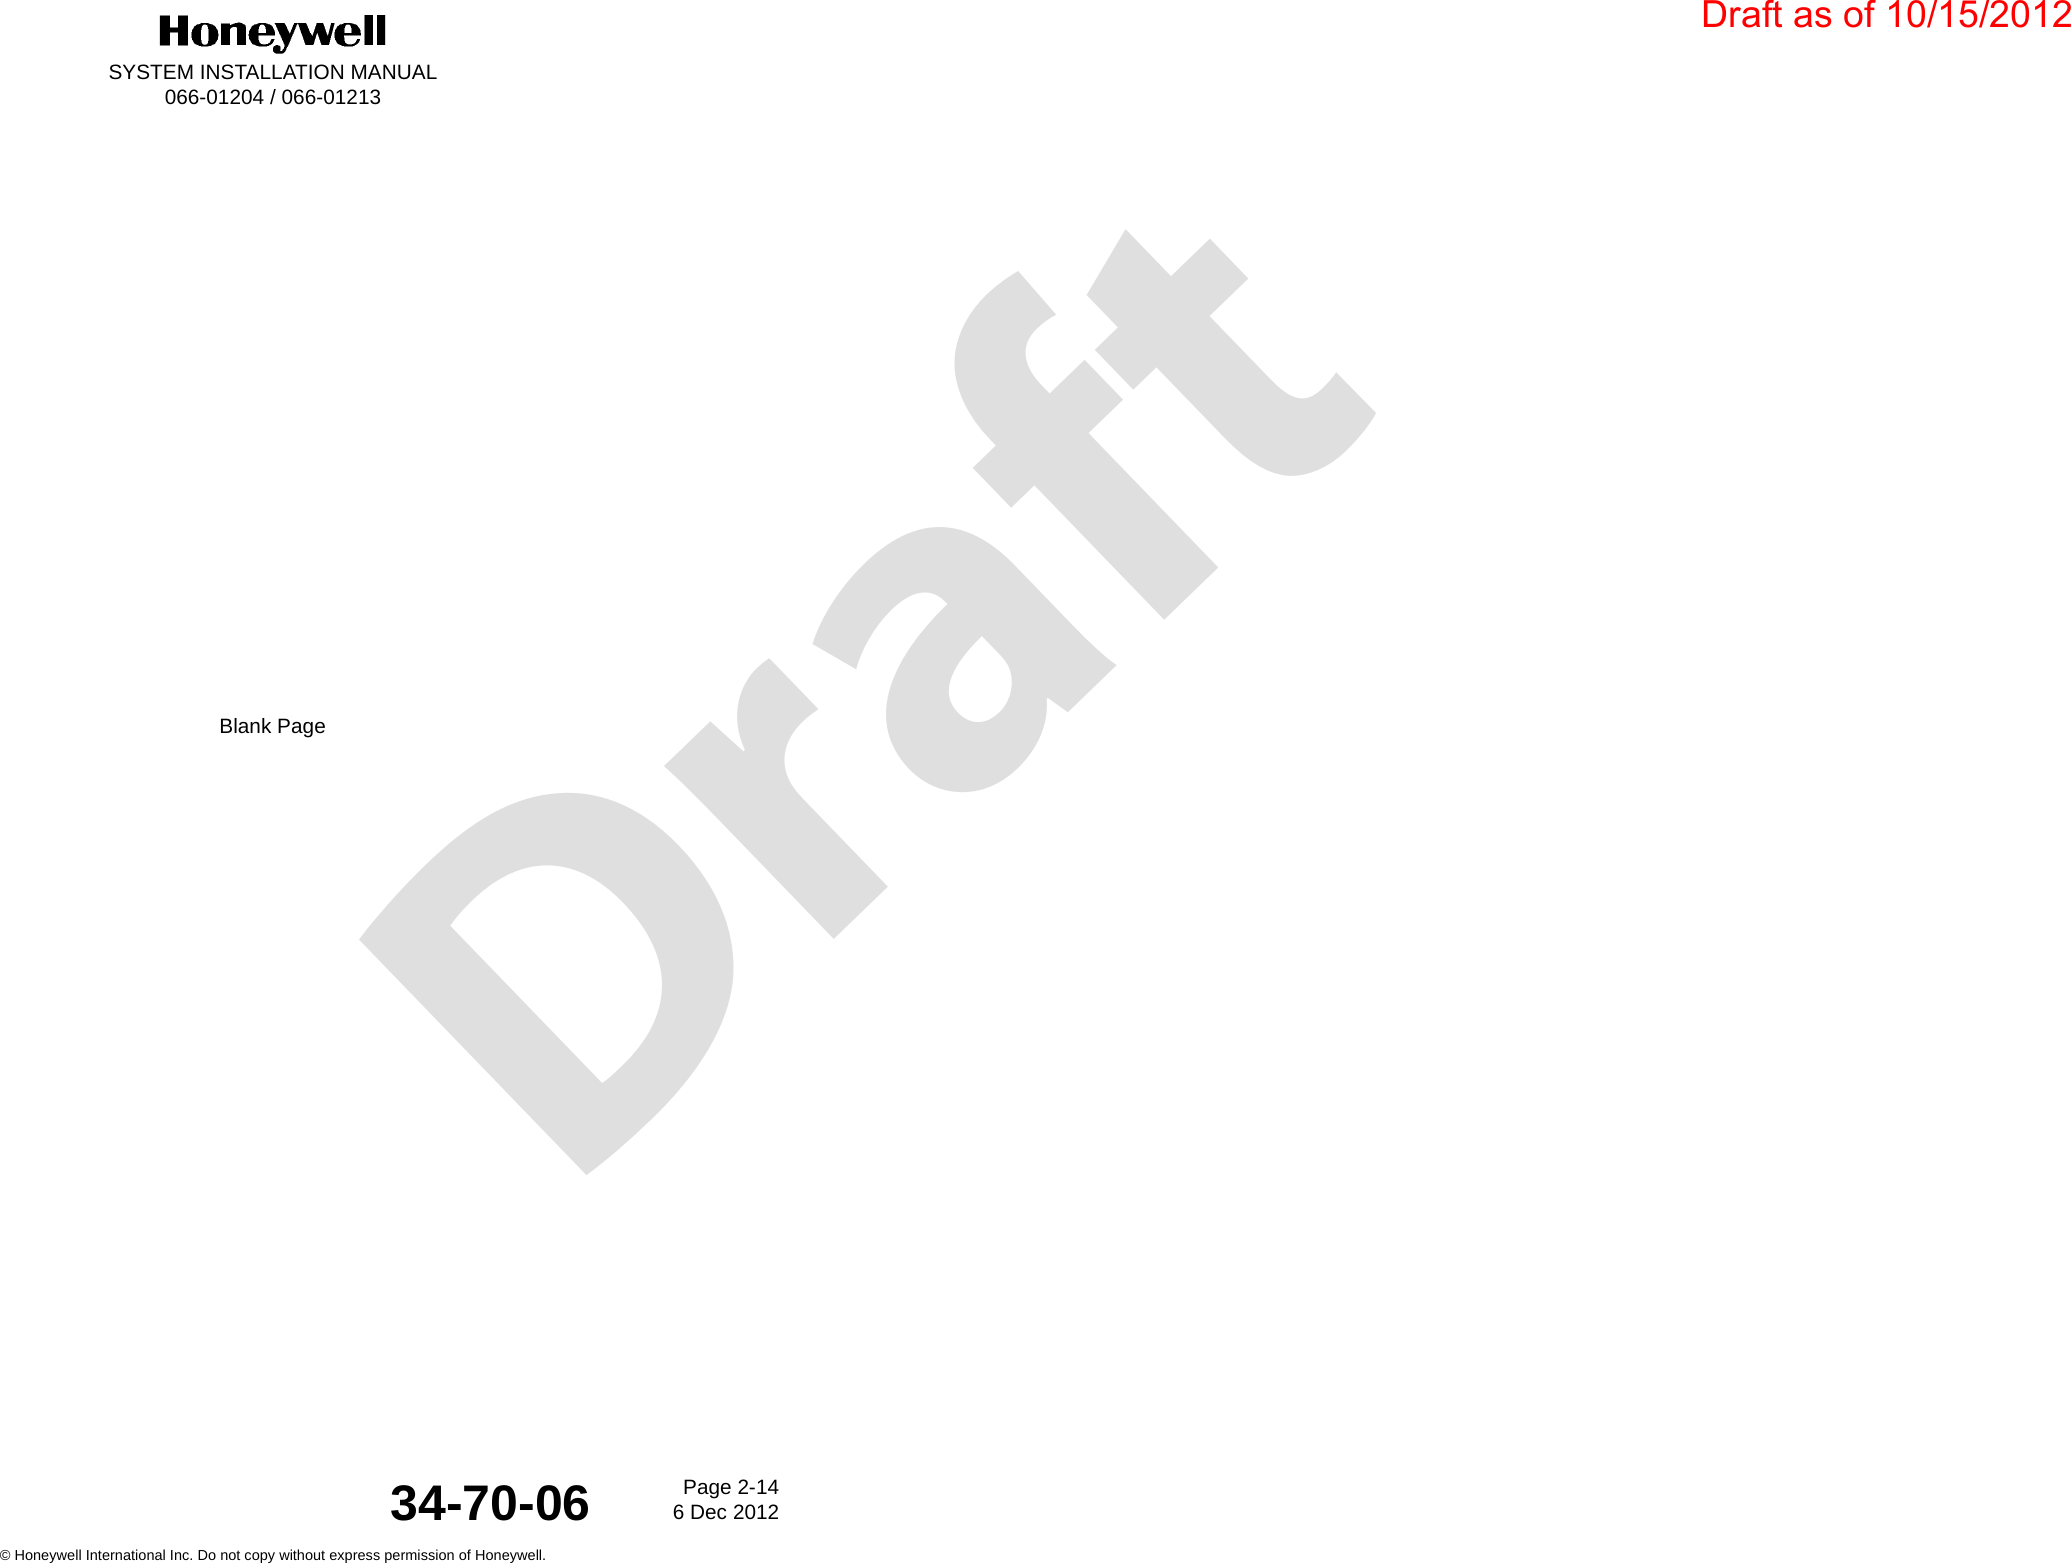 DraftSYSTEM INSTALLATION MANUAL066-01204 / 066-01213Page 2-146 Dec 2012© Honeywell International Inc. Do not copy without express permission of Honeywell.34-70-06Blank PageDraft as of 10/15/2012